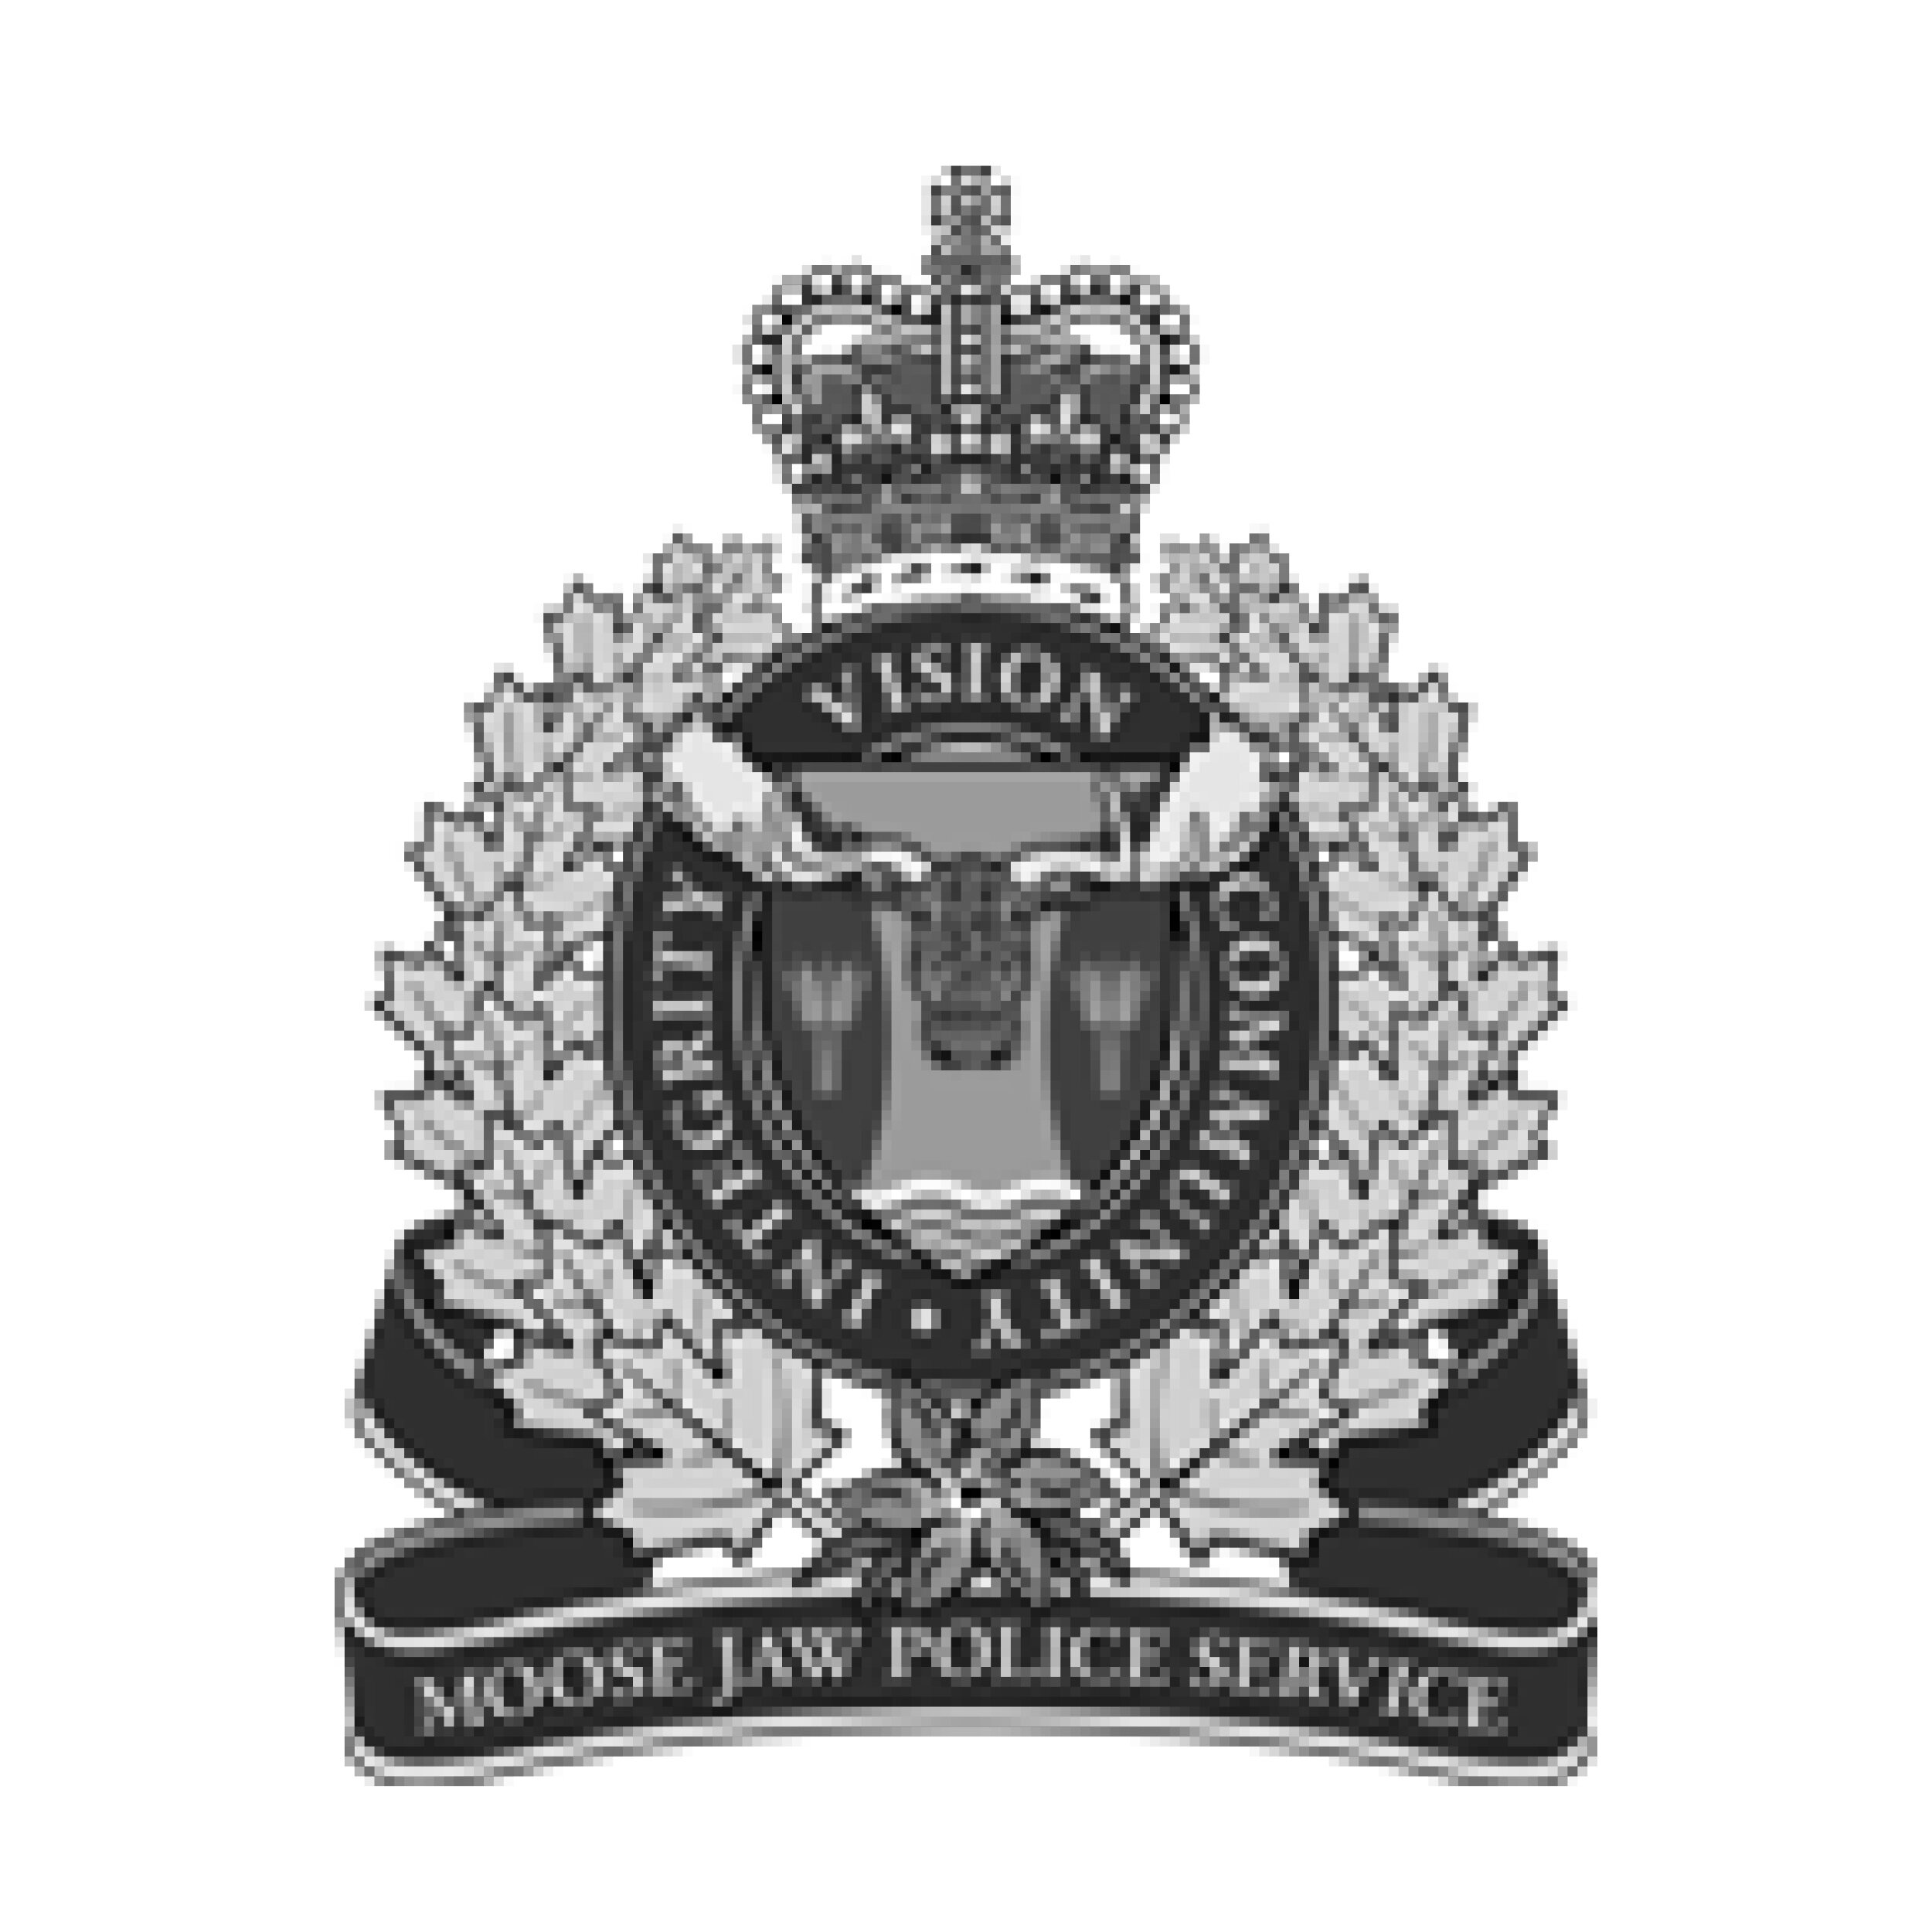 Moose Jaw Police Service